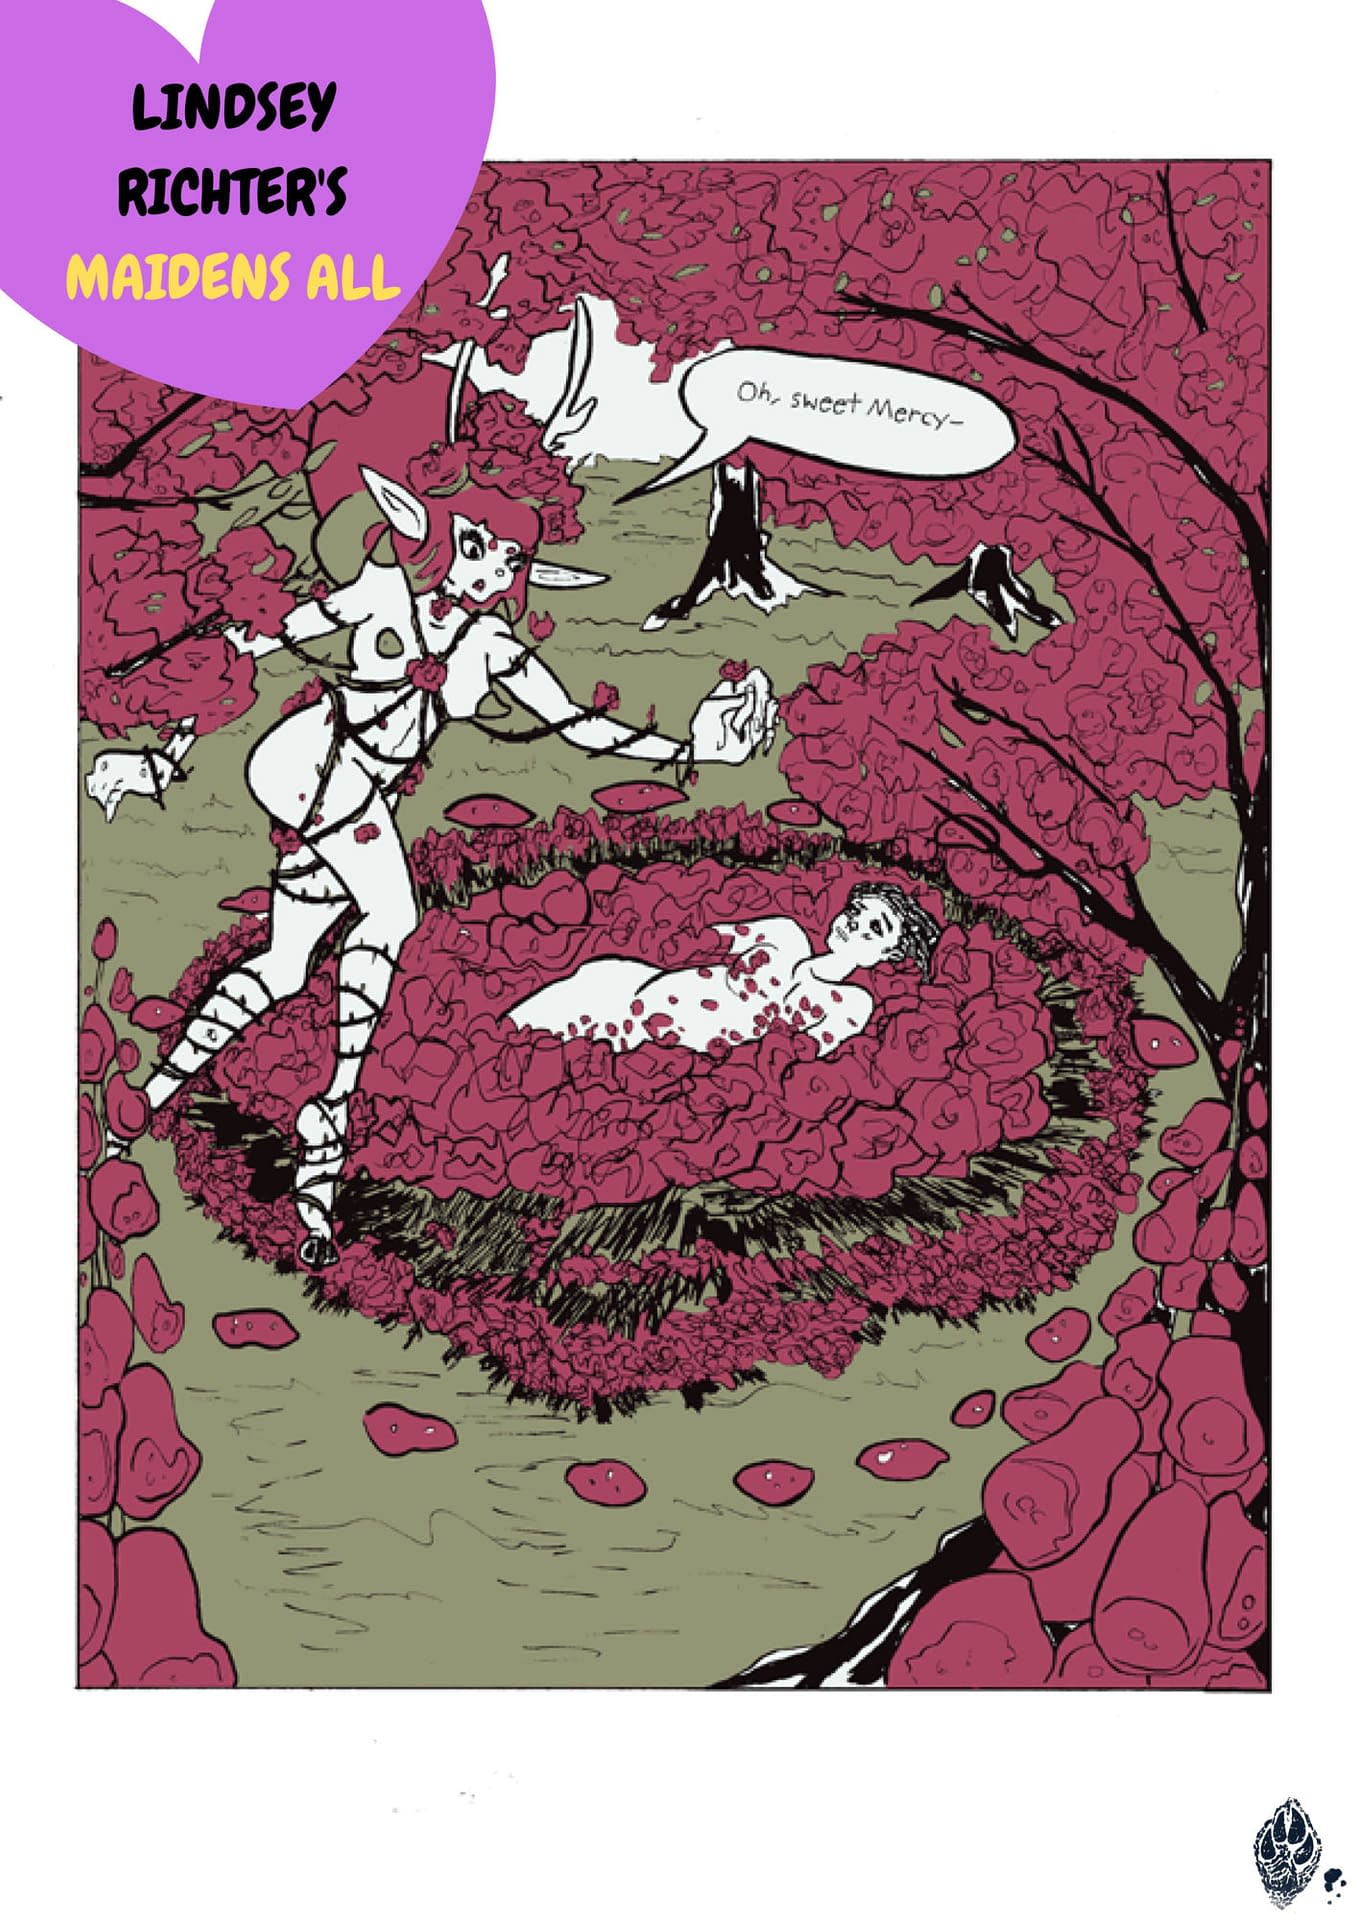 19 Pages From BUN&TEA, the Serial Comics Magazine Now on Kickstarter [Preview]